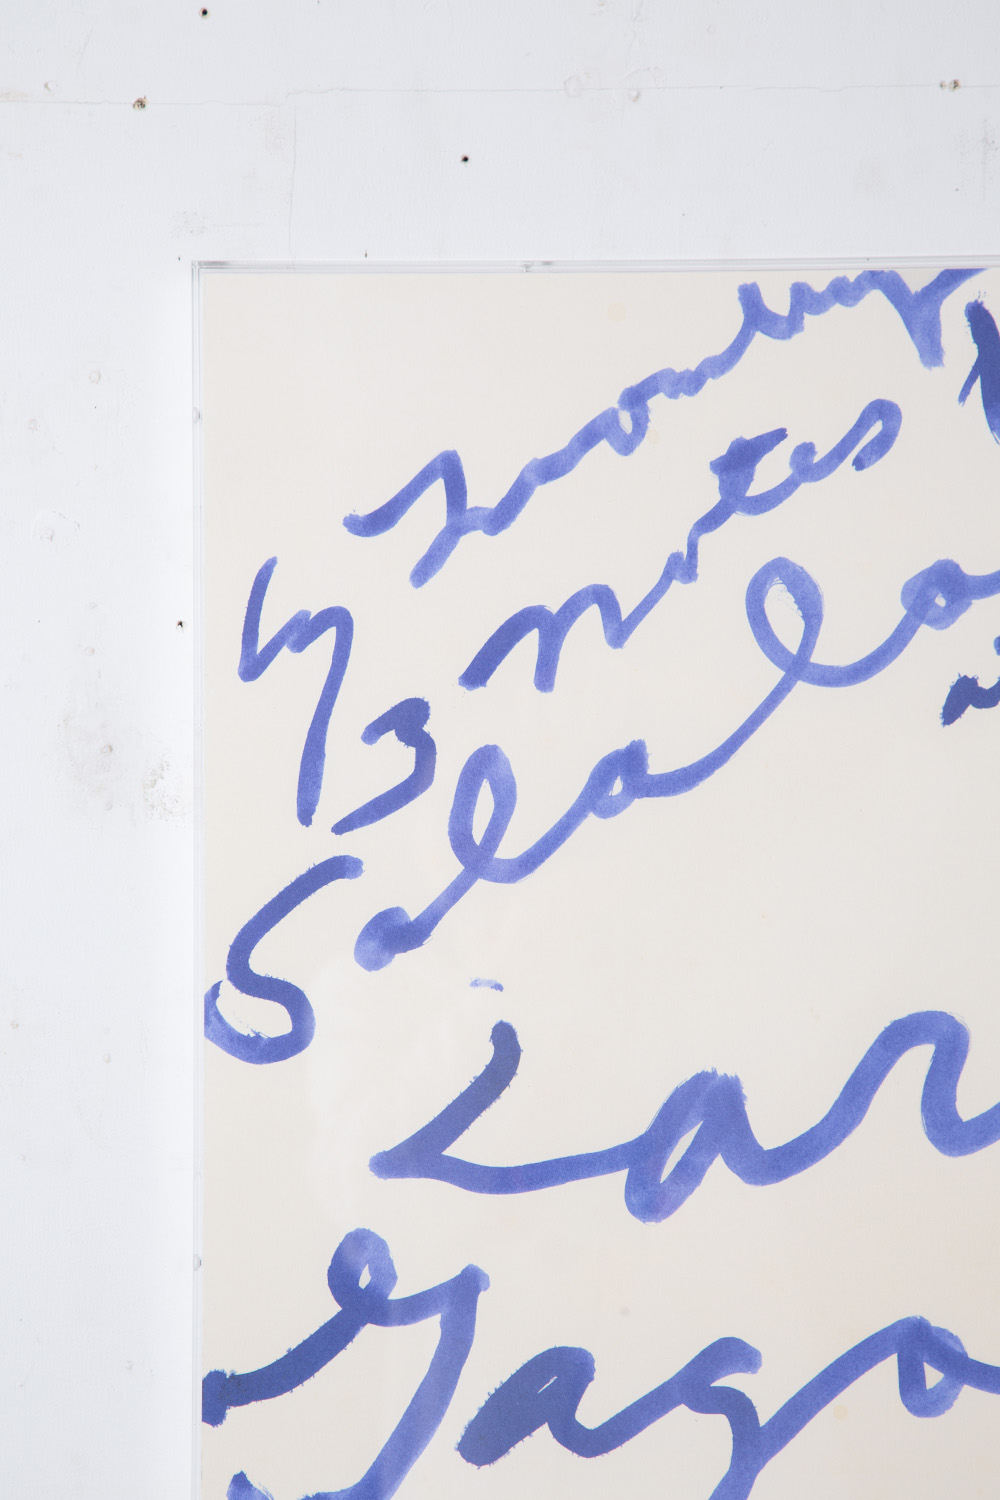 ‘Three Notes from Salalah’ by Cy Twombly for Gagosian Gallery , 2008